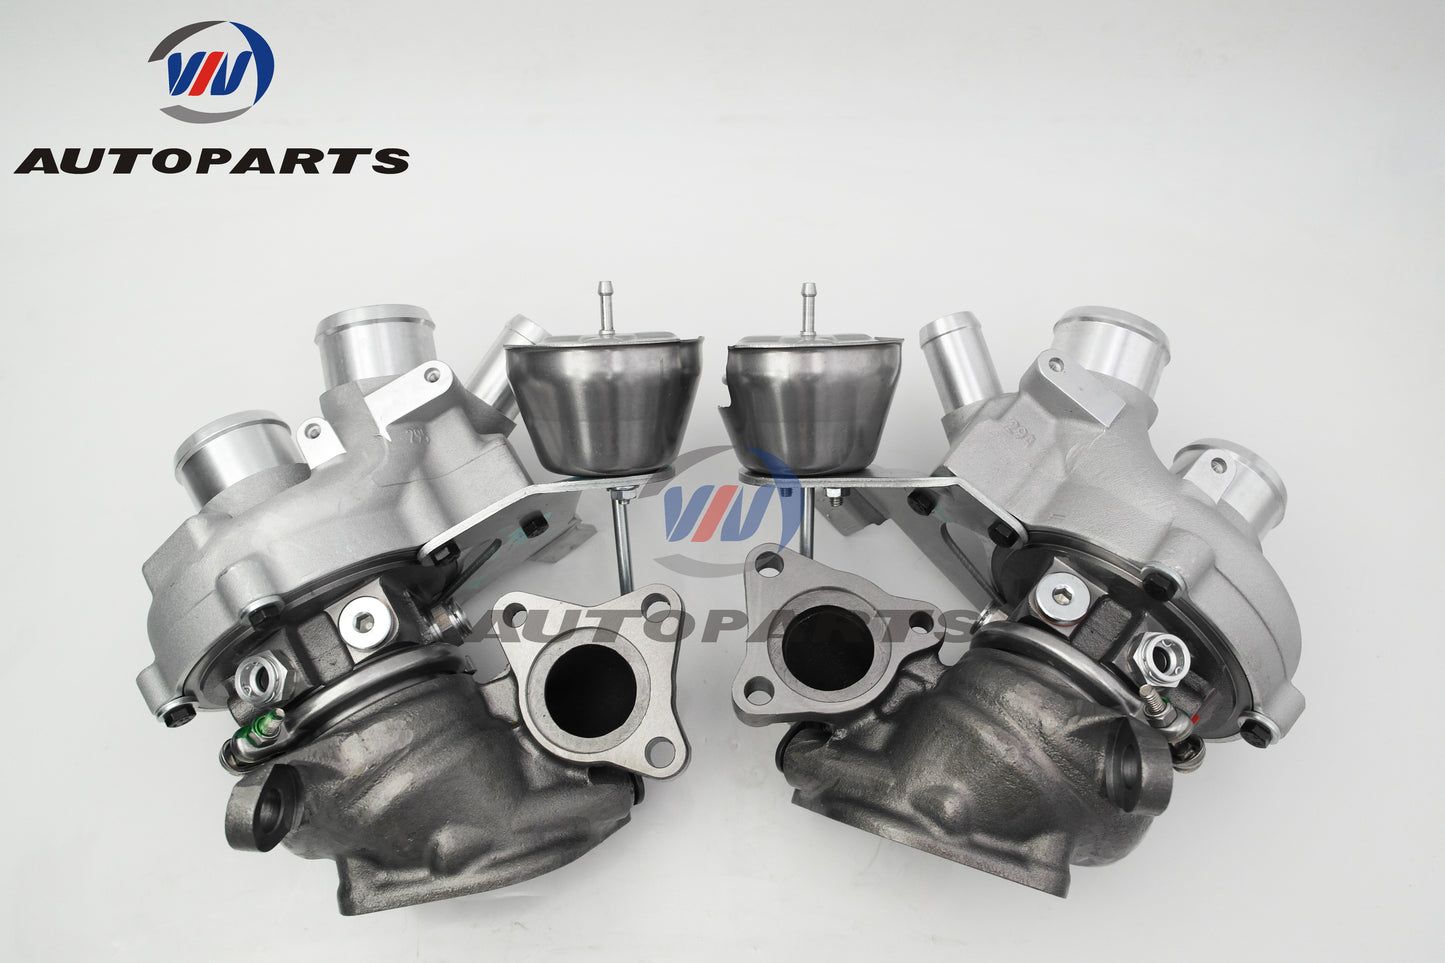 Twin Turbochargers 179204 &179205 For Ford F150 Ecoboost 3.5L 2010-2012 Pair Turbo Kit